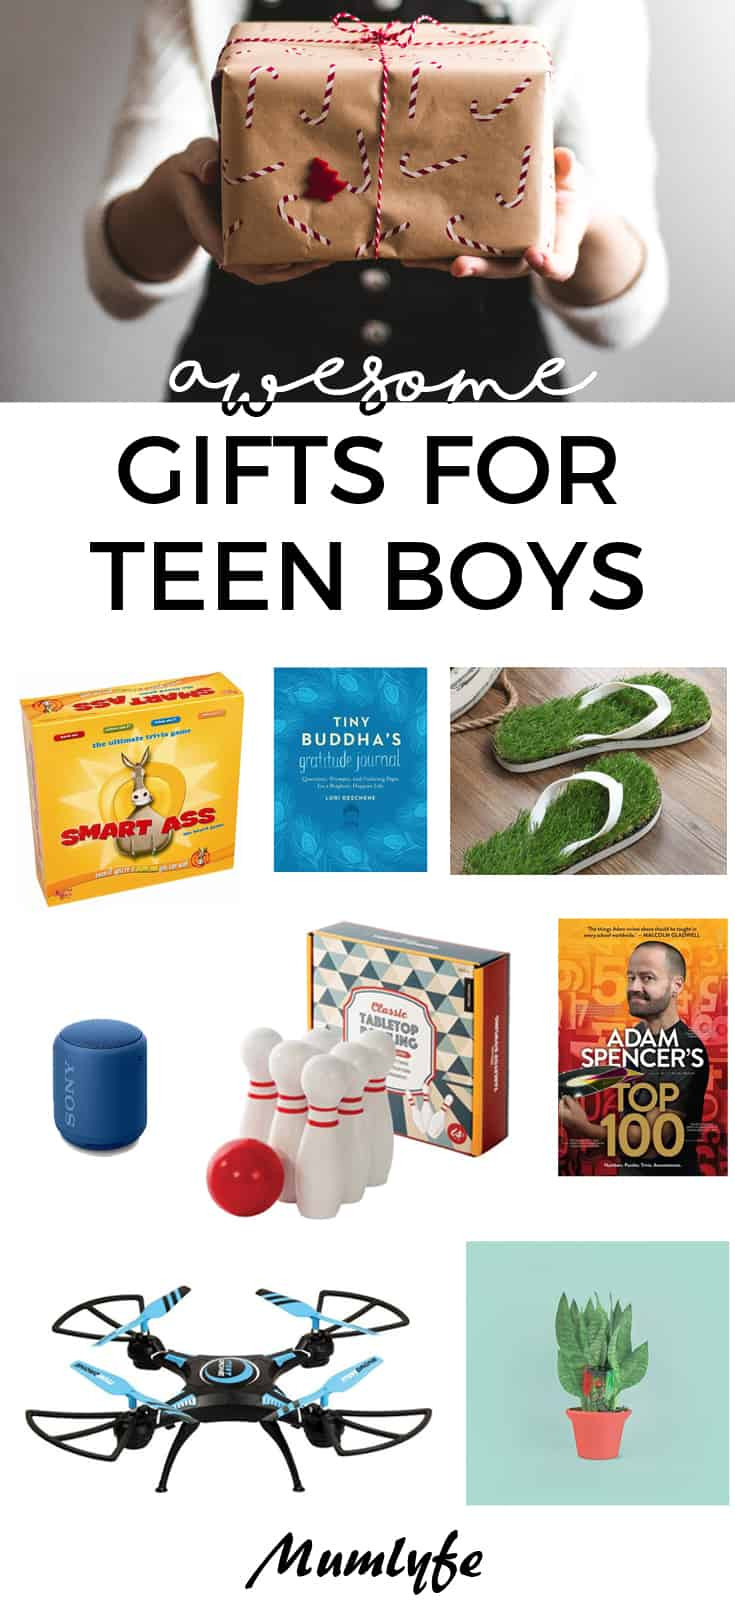 Gift Ideas For Teenage Boys
 Awesome t ideas for teen boys they will love anything